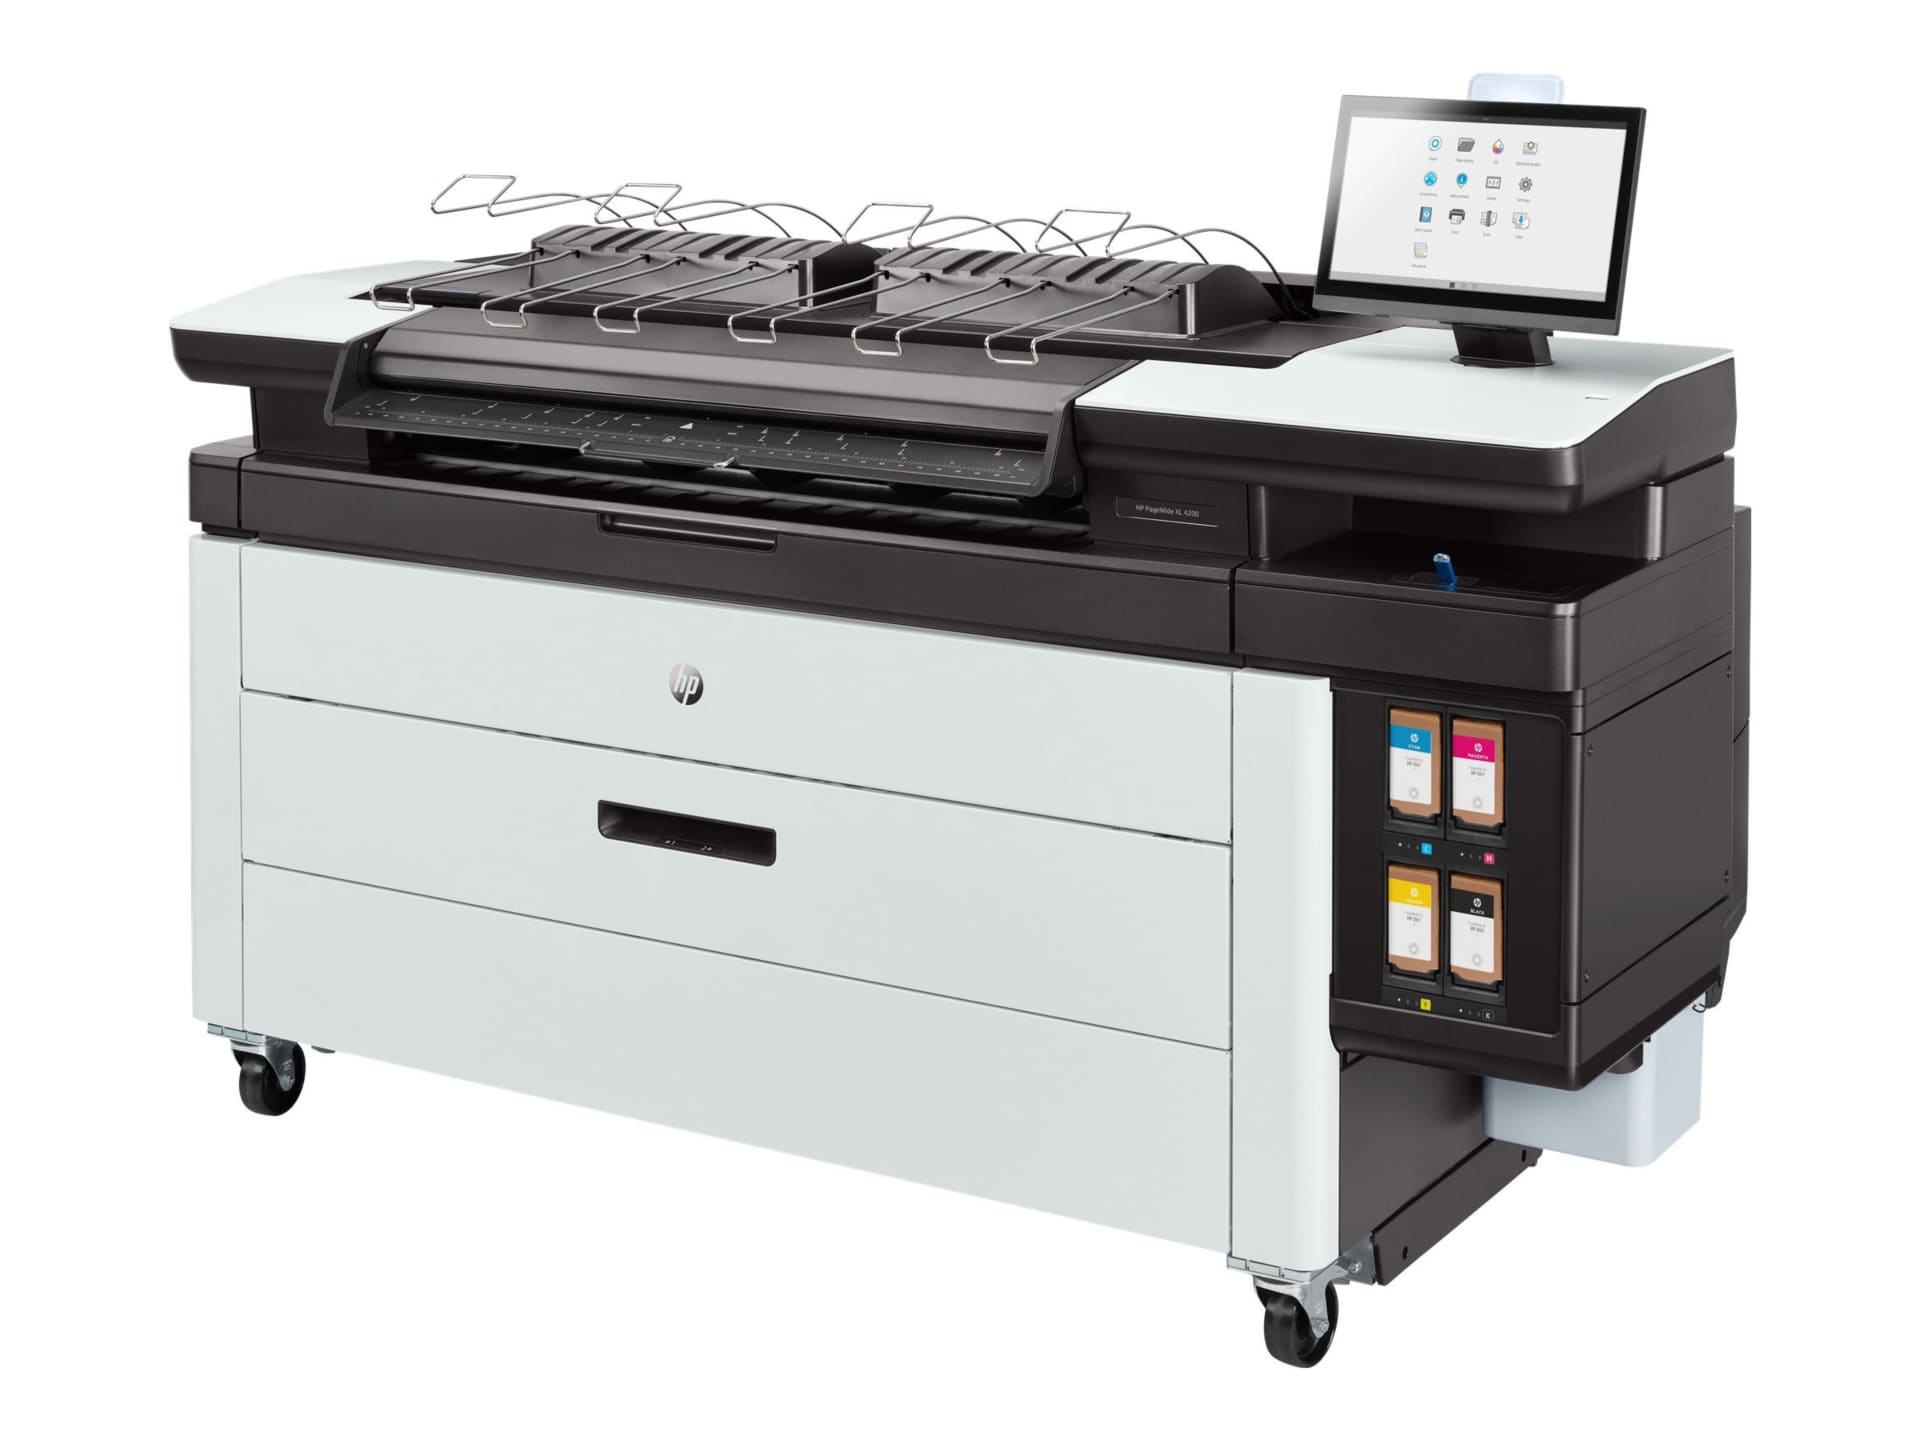 HP PageWide XL 4200 - multifunction printer - color